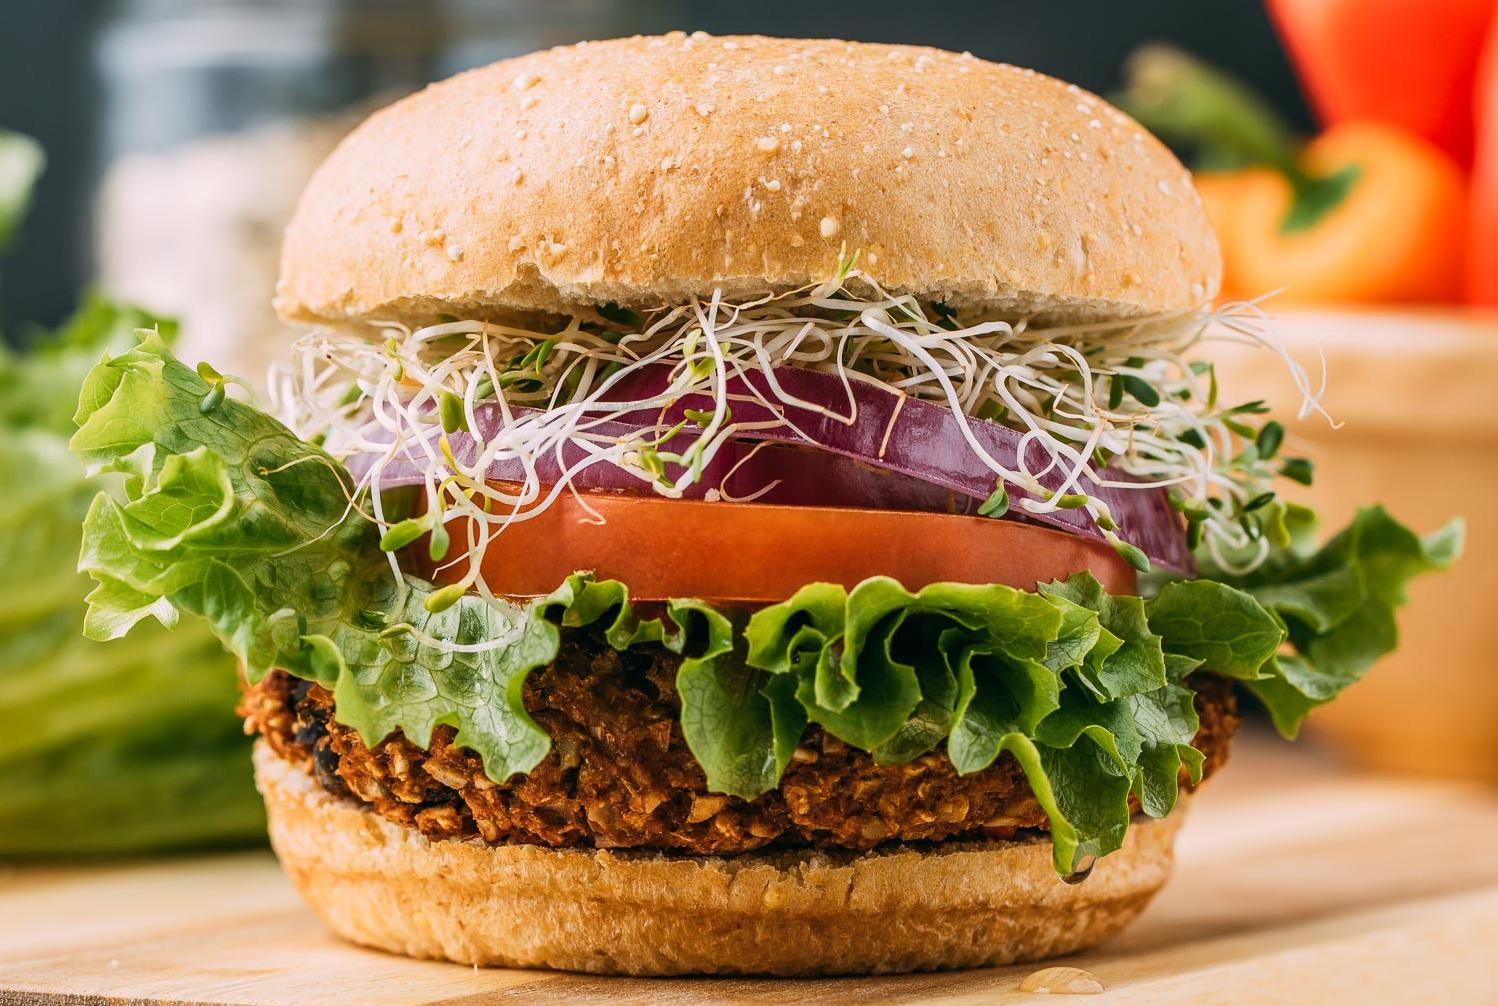  Friends and family will be begging for the recipe after they try our irresistible veggie burgers.